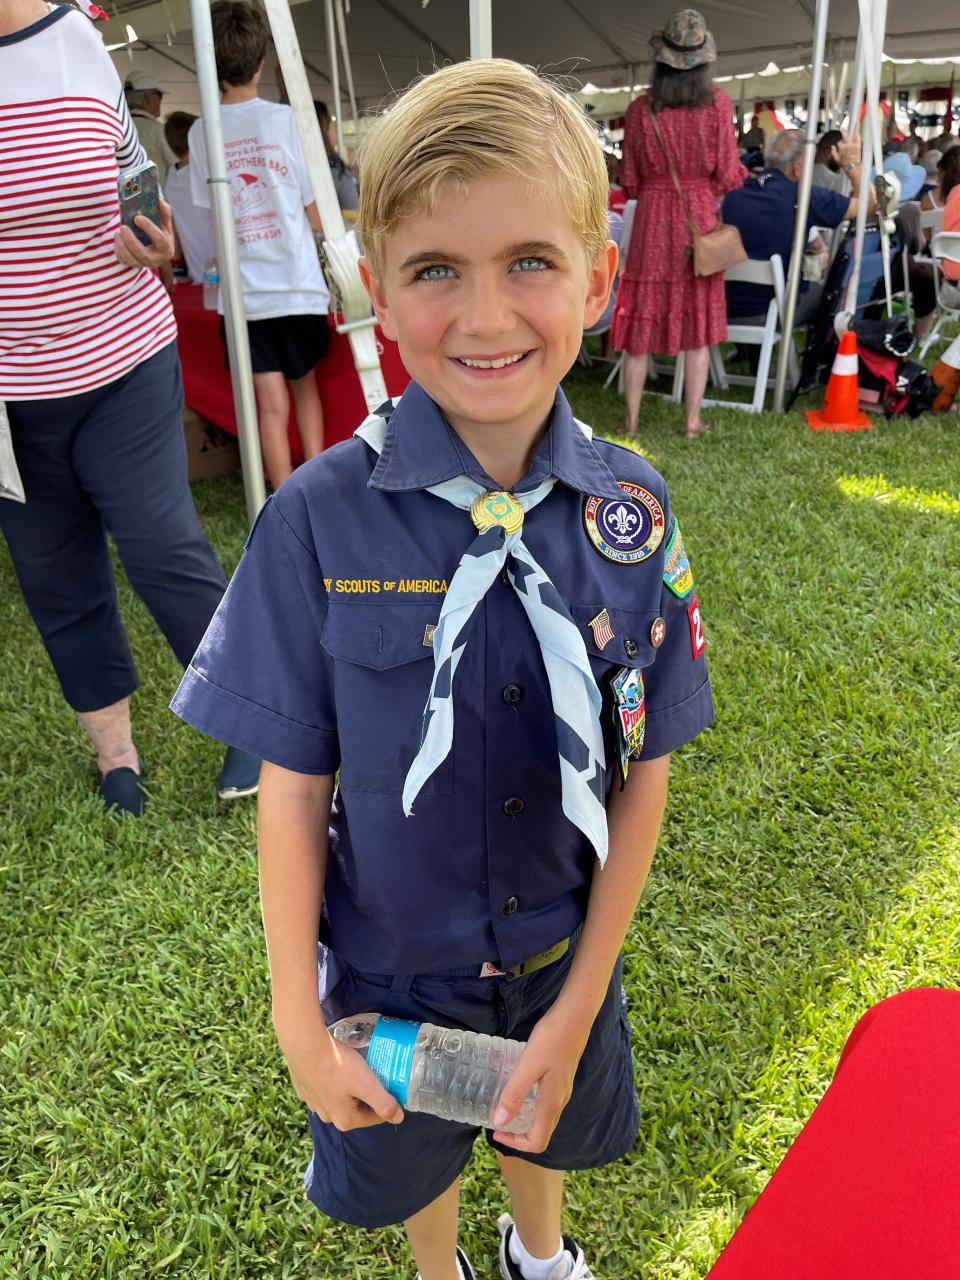 Thomas Gorman, 8, of Boy Scout Troop 226, helped distribute water at the annual Earl Hodges Memorial Day Picnic in Collier County, May 29, 2023.